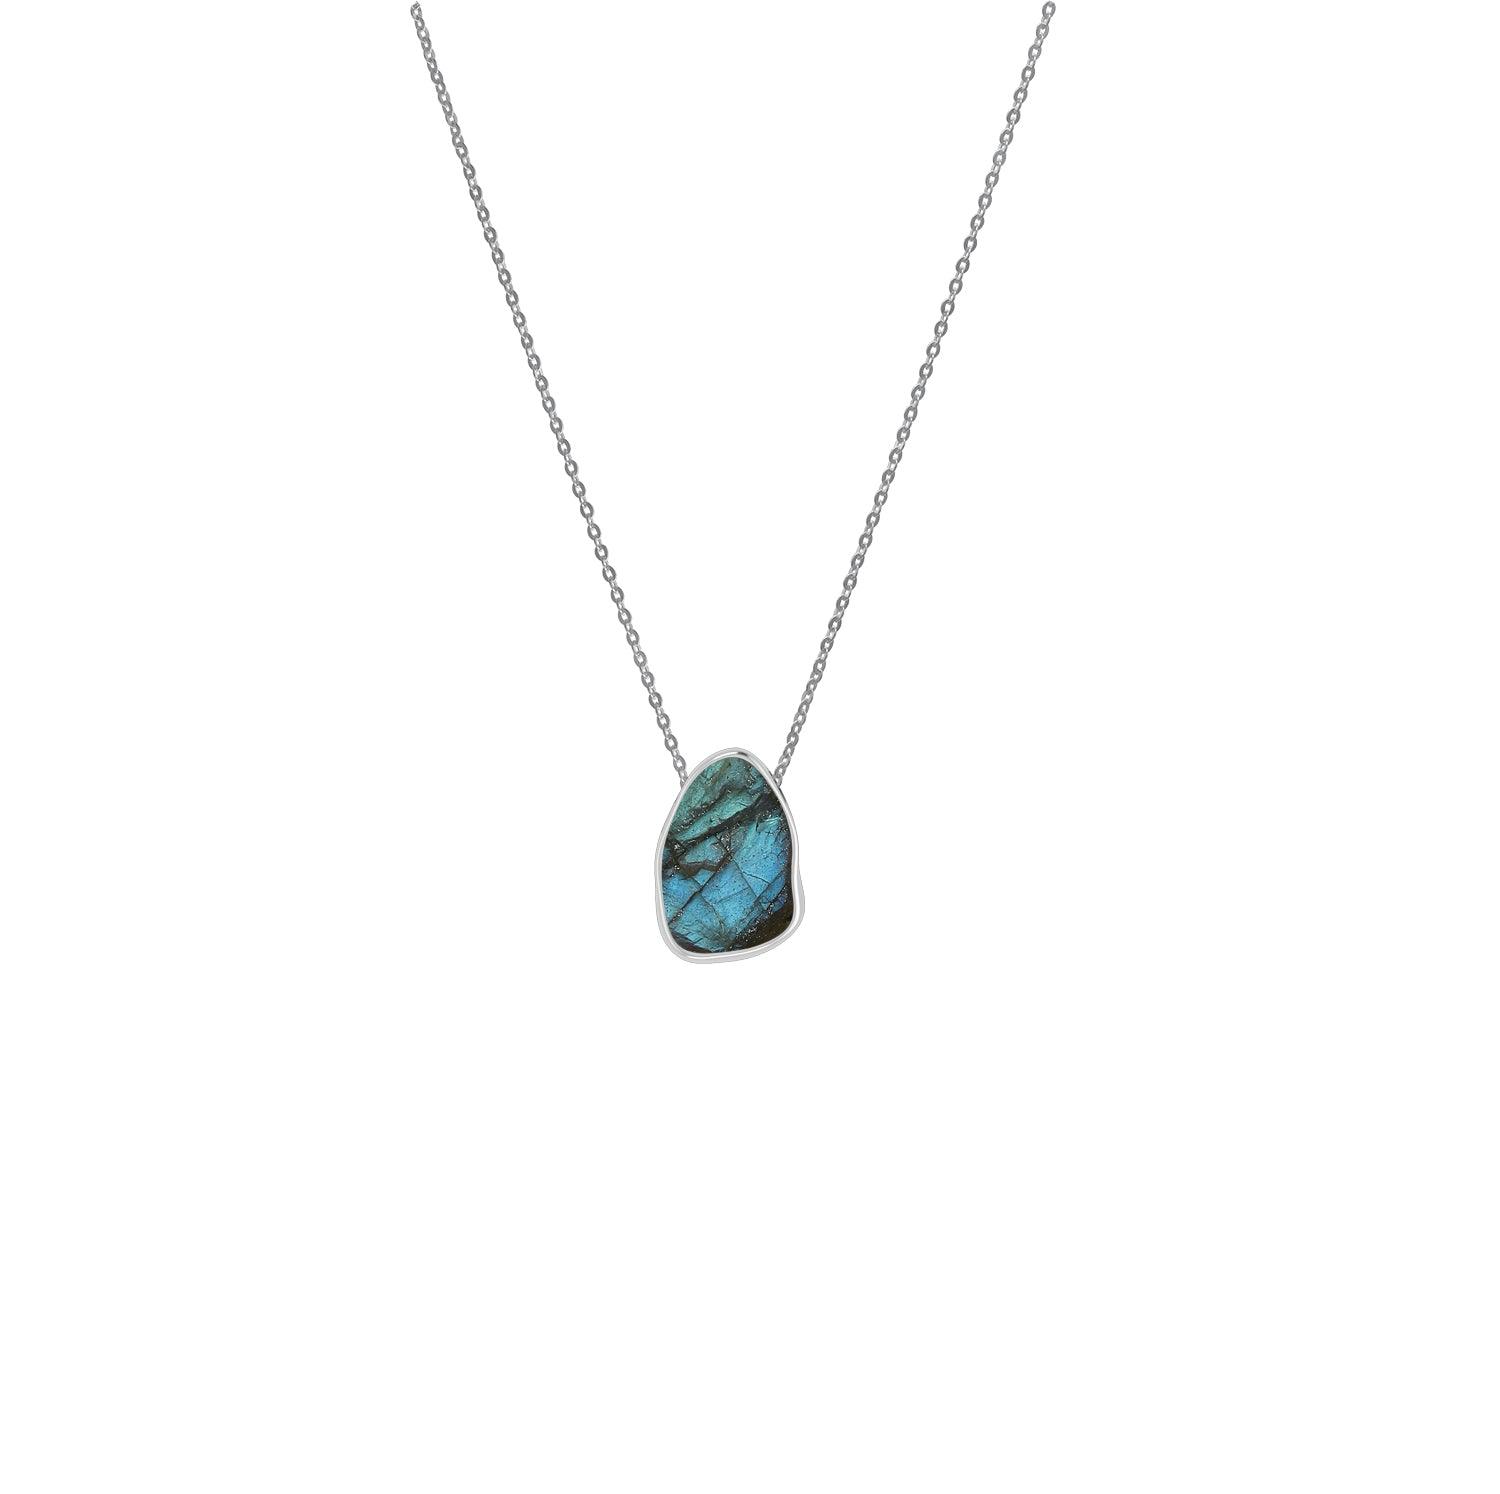 925 Sterling Silver Rough Labradorite Slider Necklace With Chain 18" Bezel Set Jewelry Pack of 6